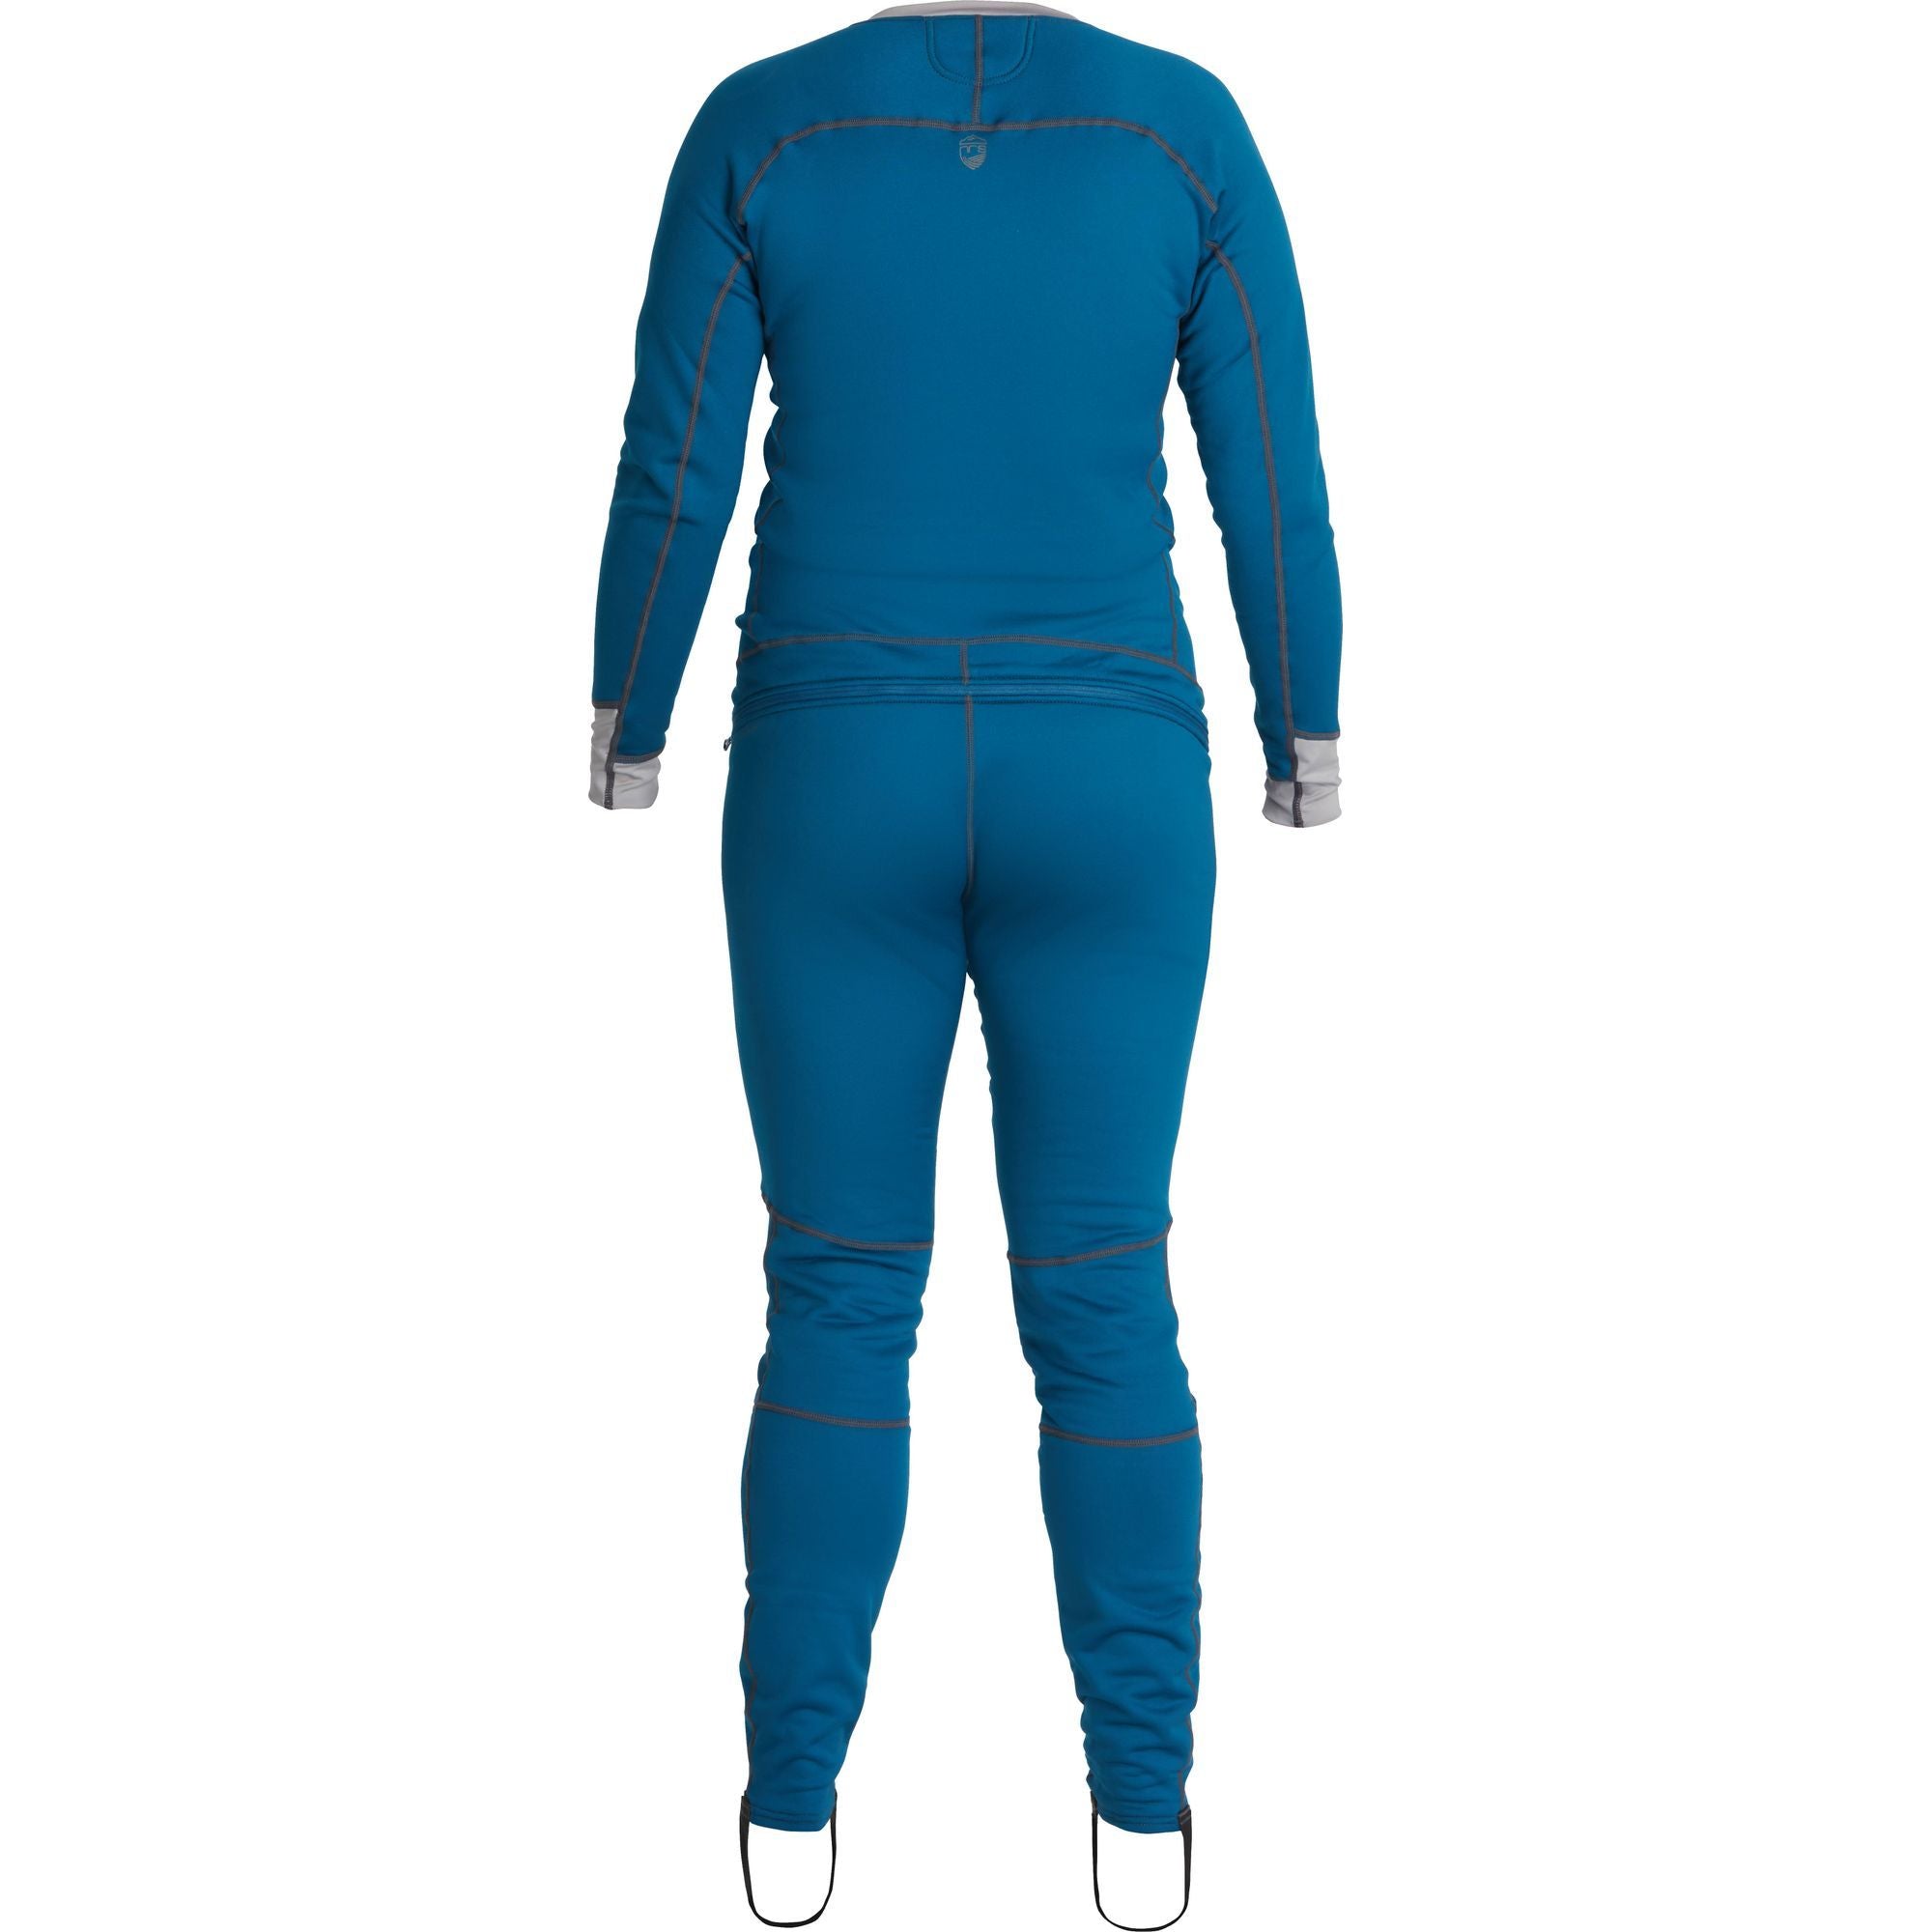 NRS Expedition Weight Union Suit, Damen